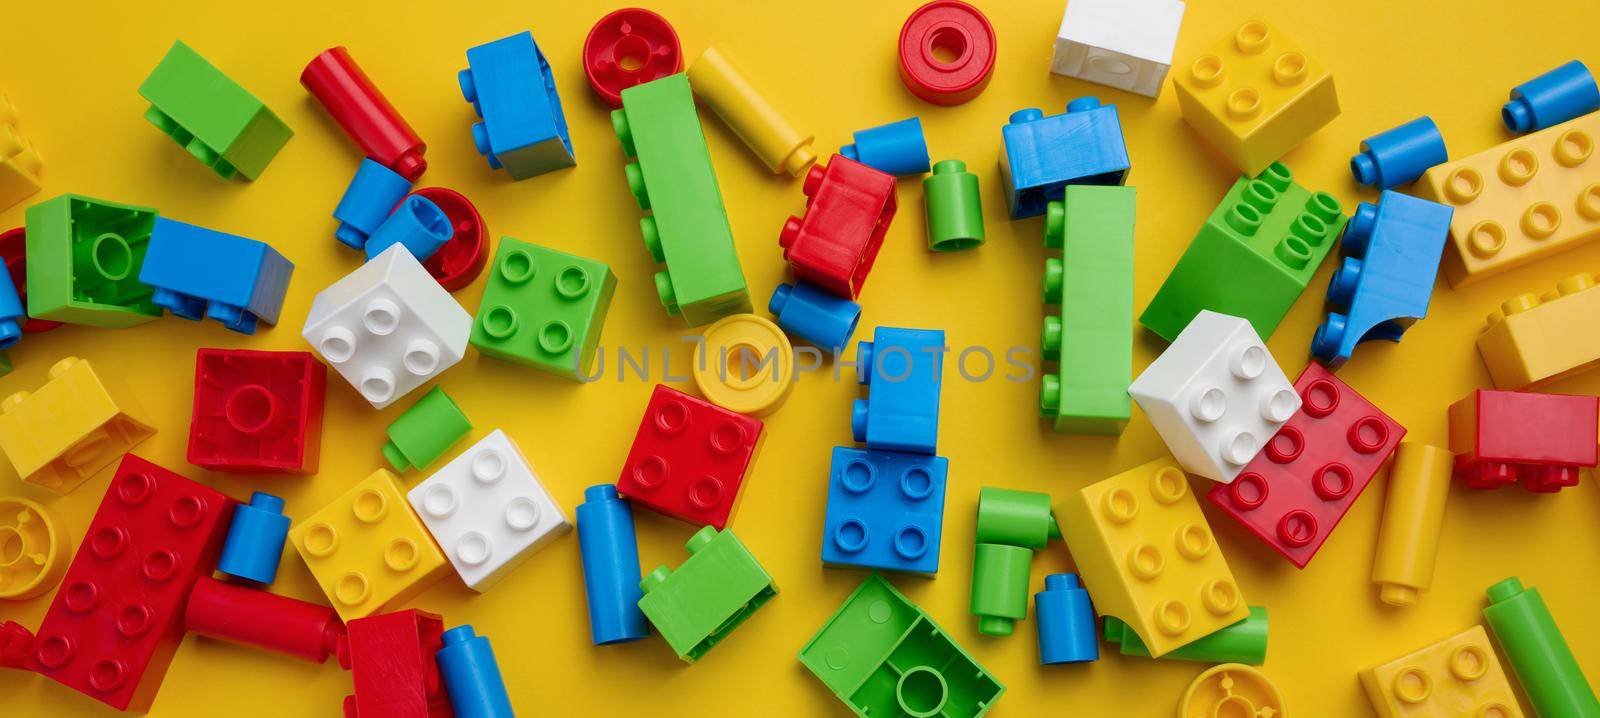 Scattered parts of a plastic children's designer, top view. Yellow background, copy space